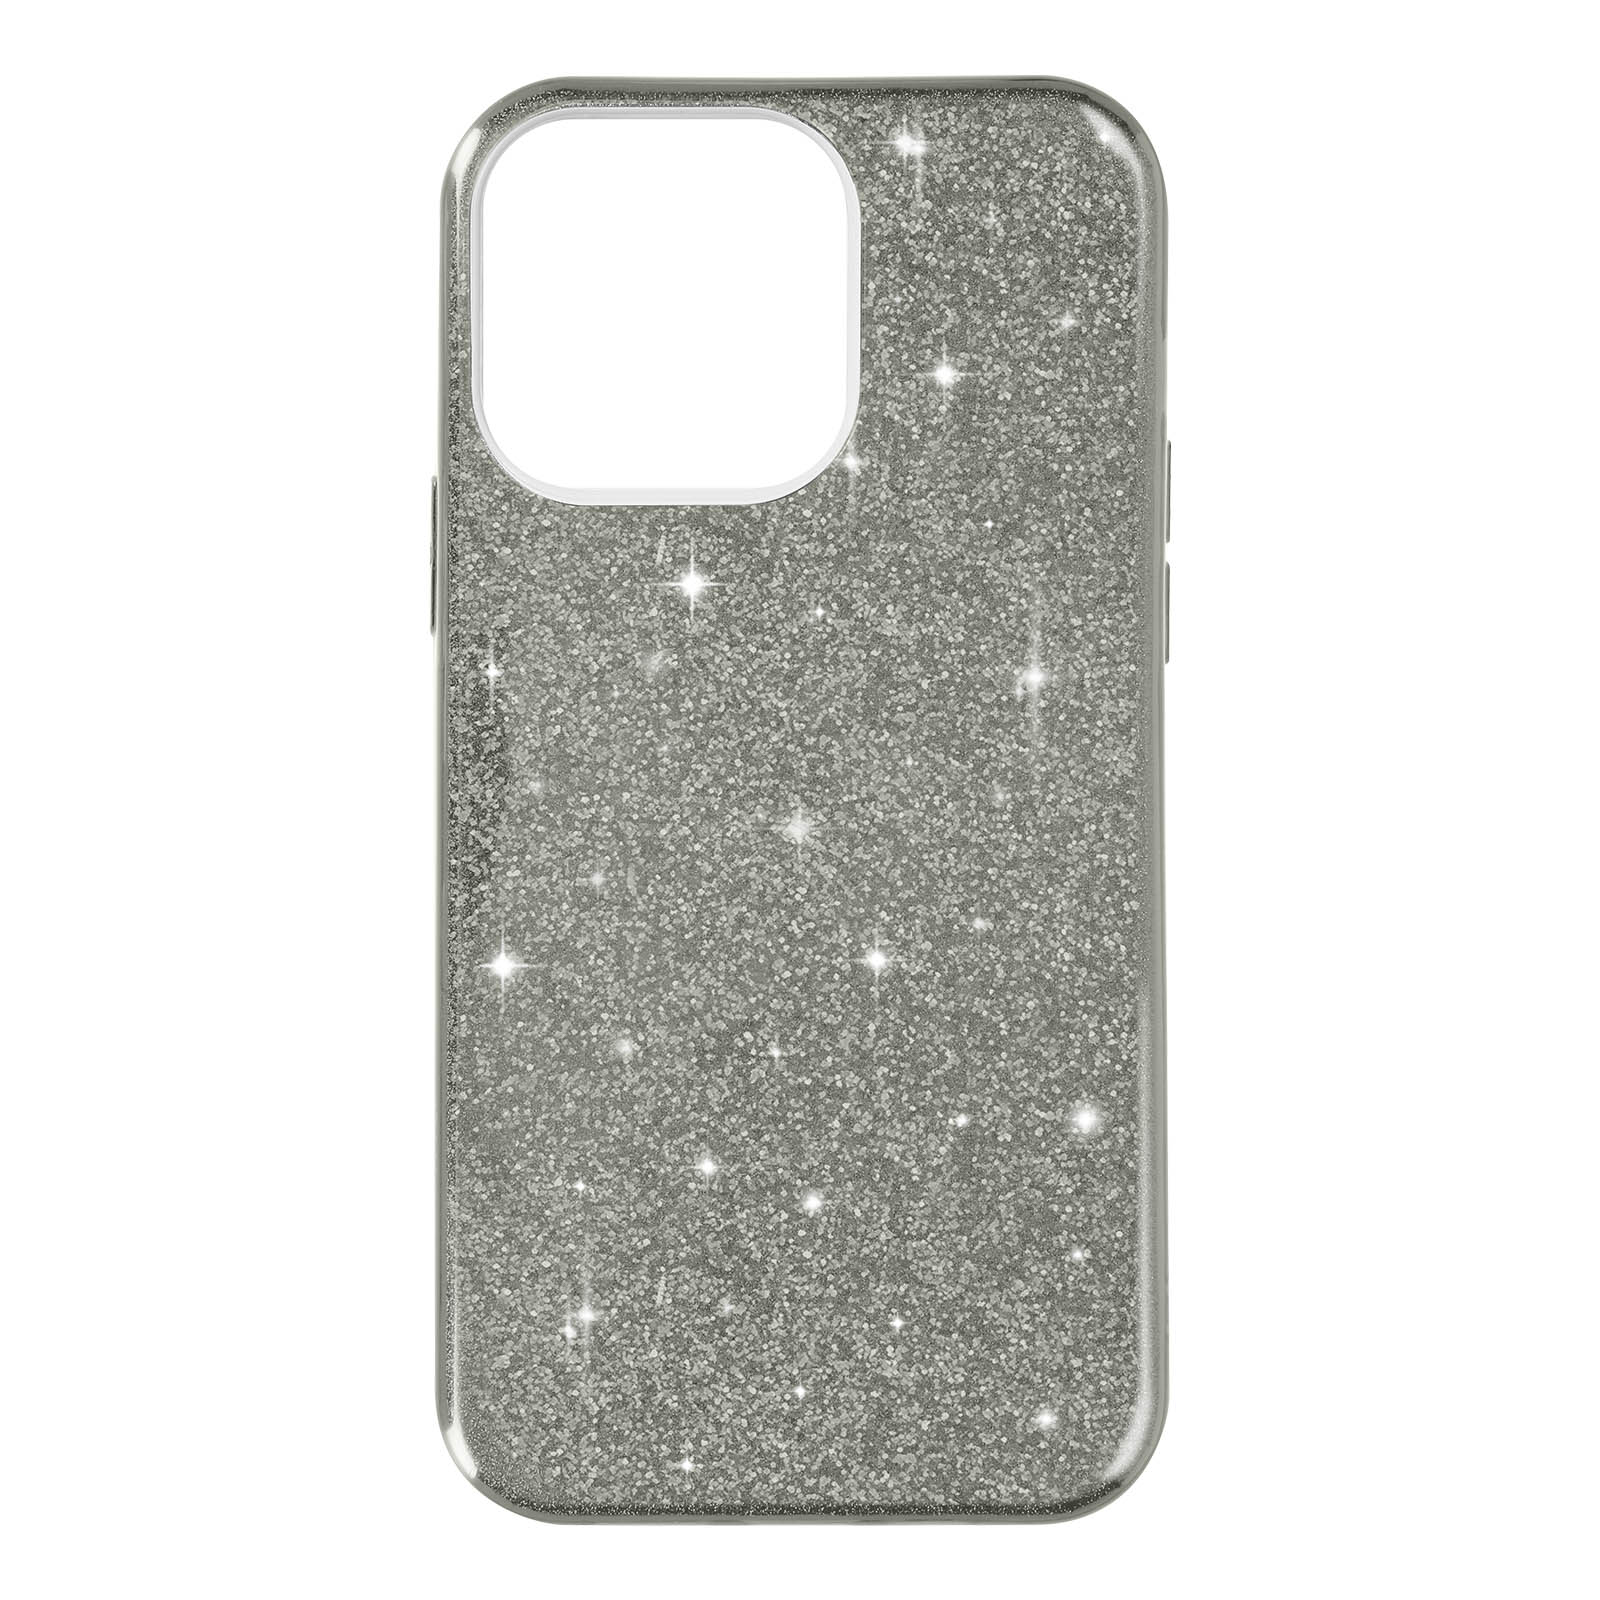 14 Pro iPhone Max, Backcover, Series, Silber Apple, Papay AVIZAR